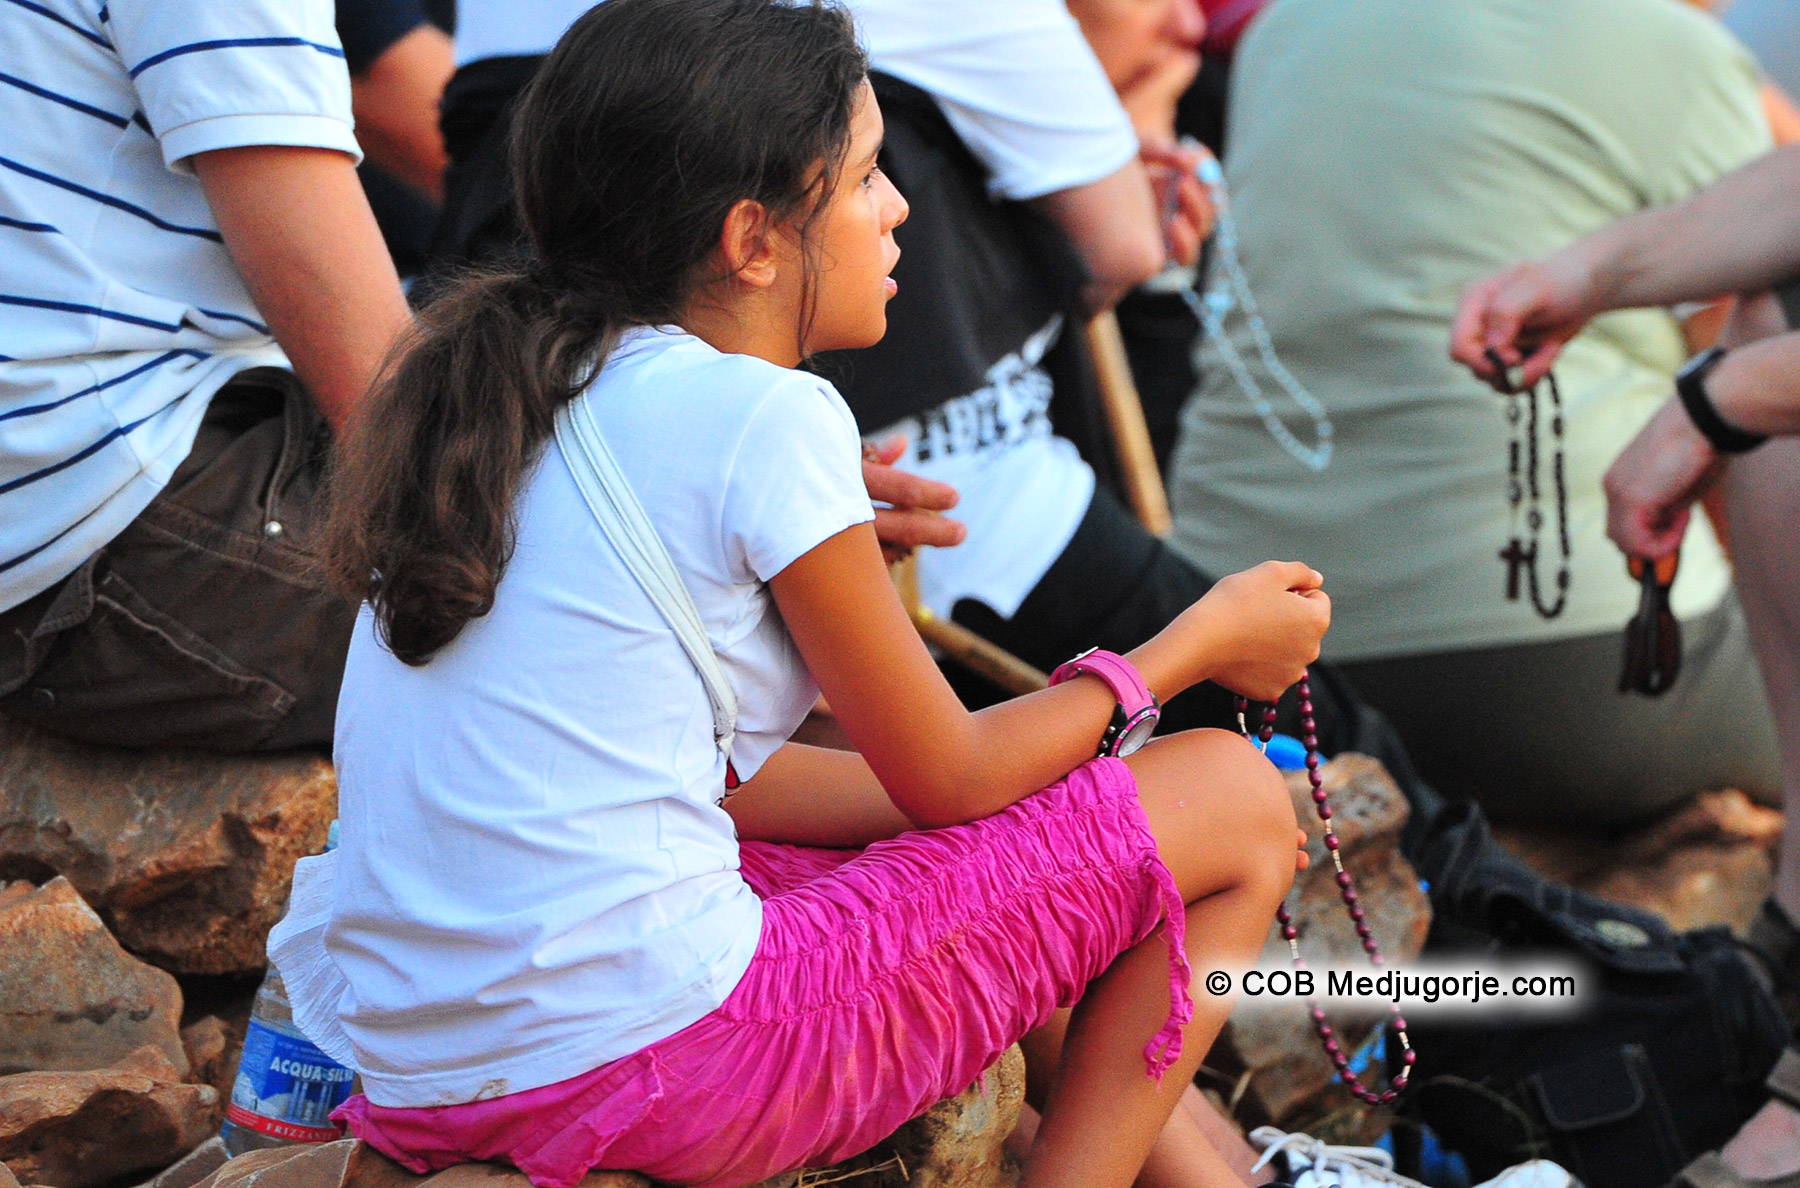 Young girl in Medjugorje praying August 24, 2012